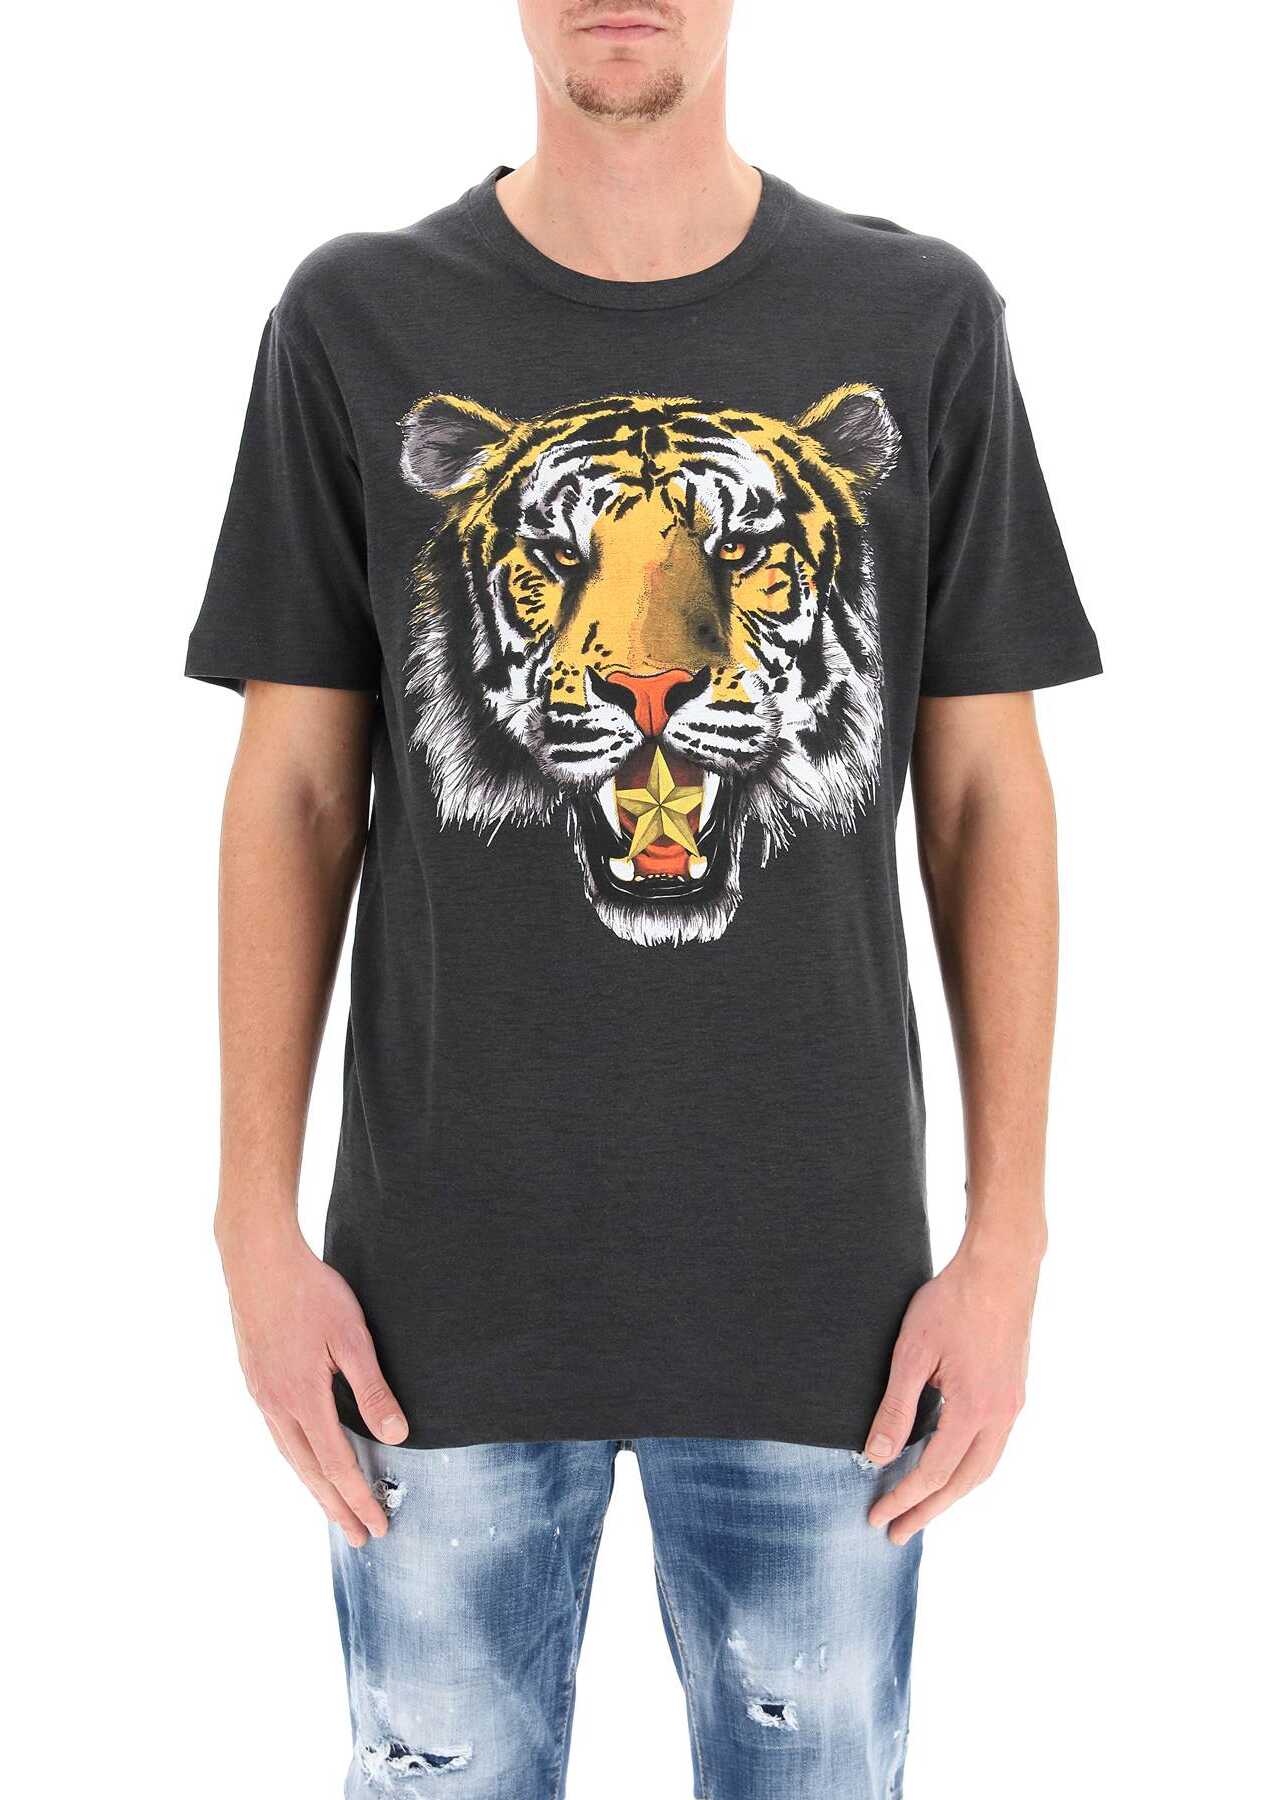 DSQUARED2 Maxi Tiger Print T-Shirt S71GD1115 S22146 ANTHRACITE